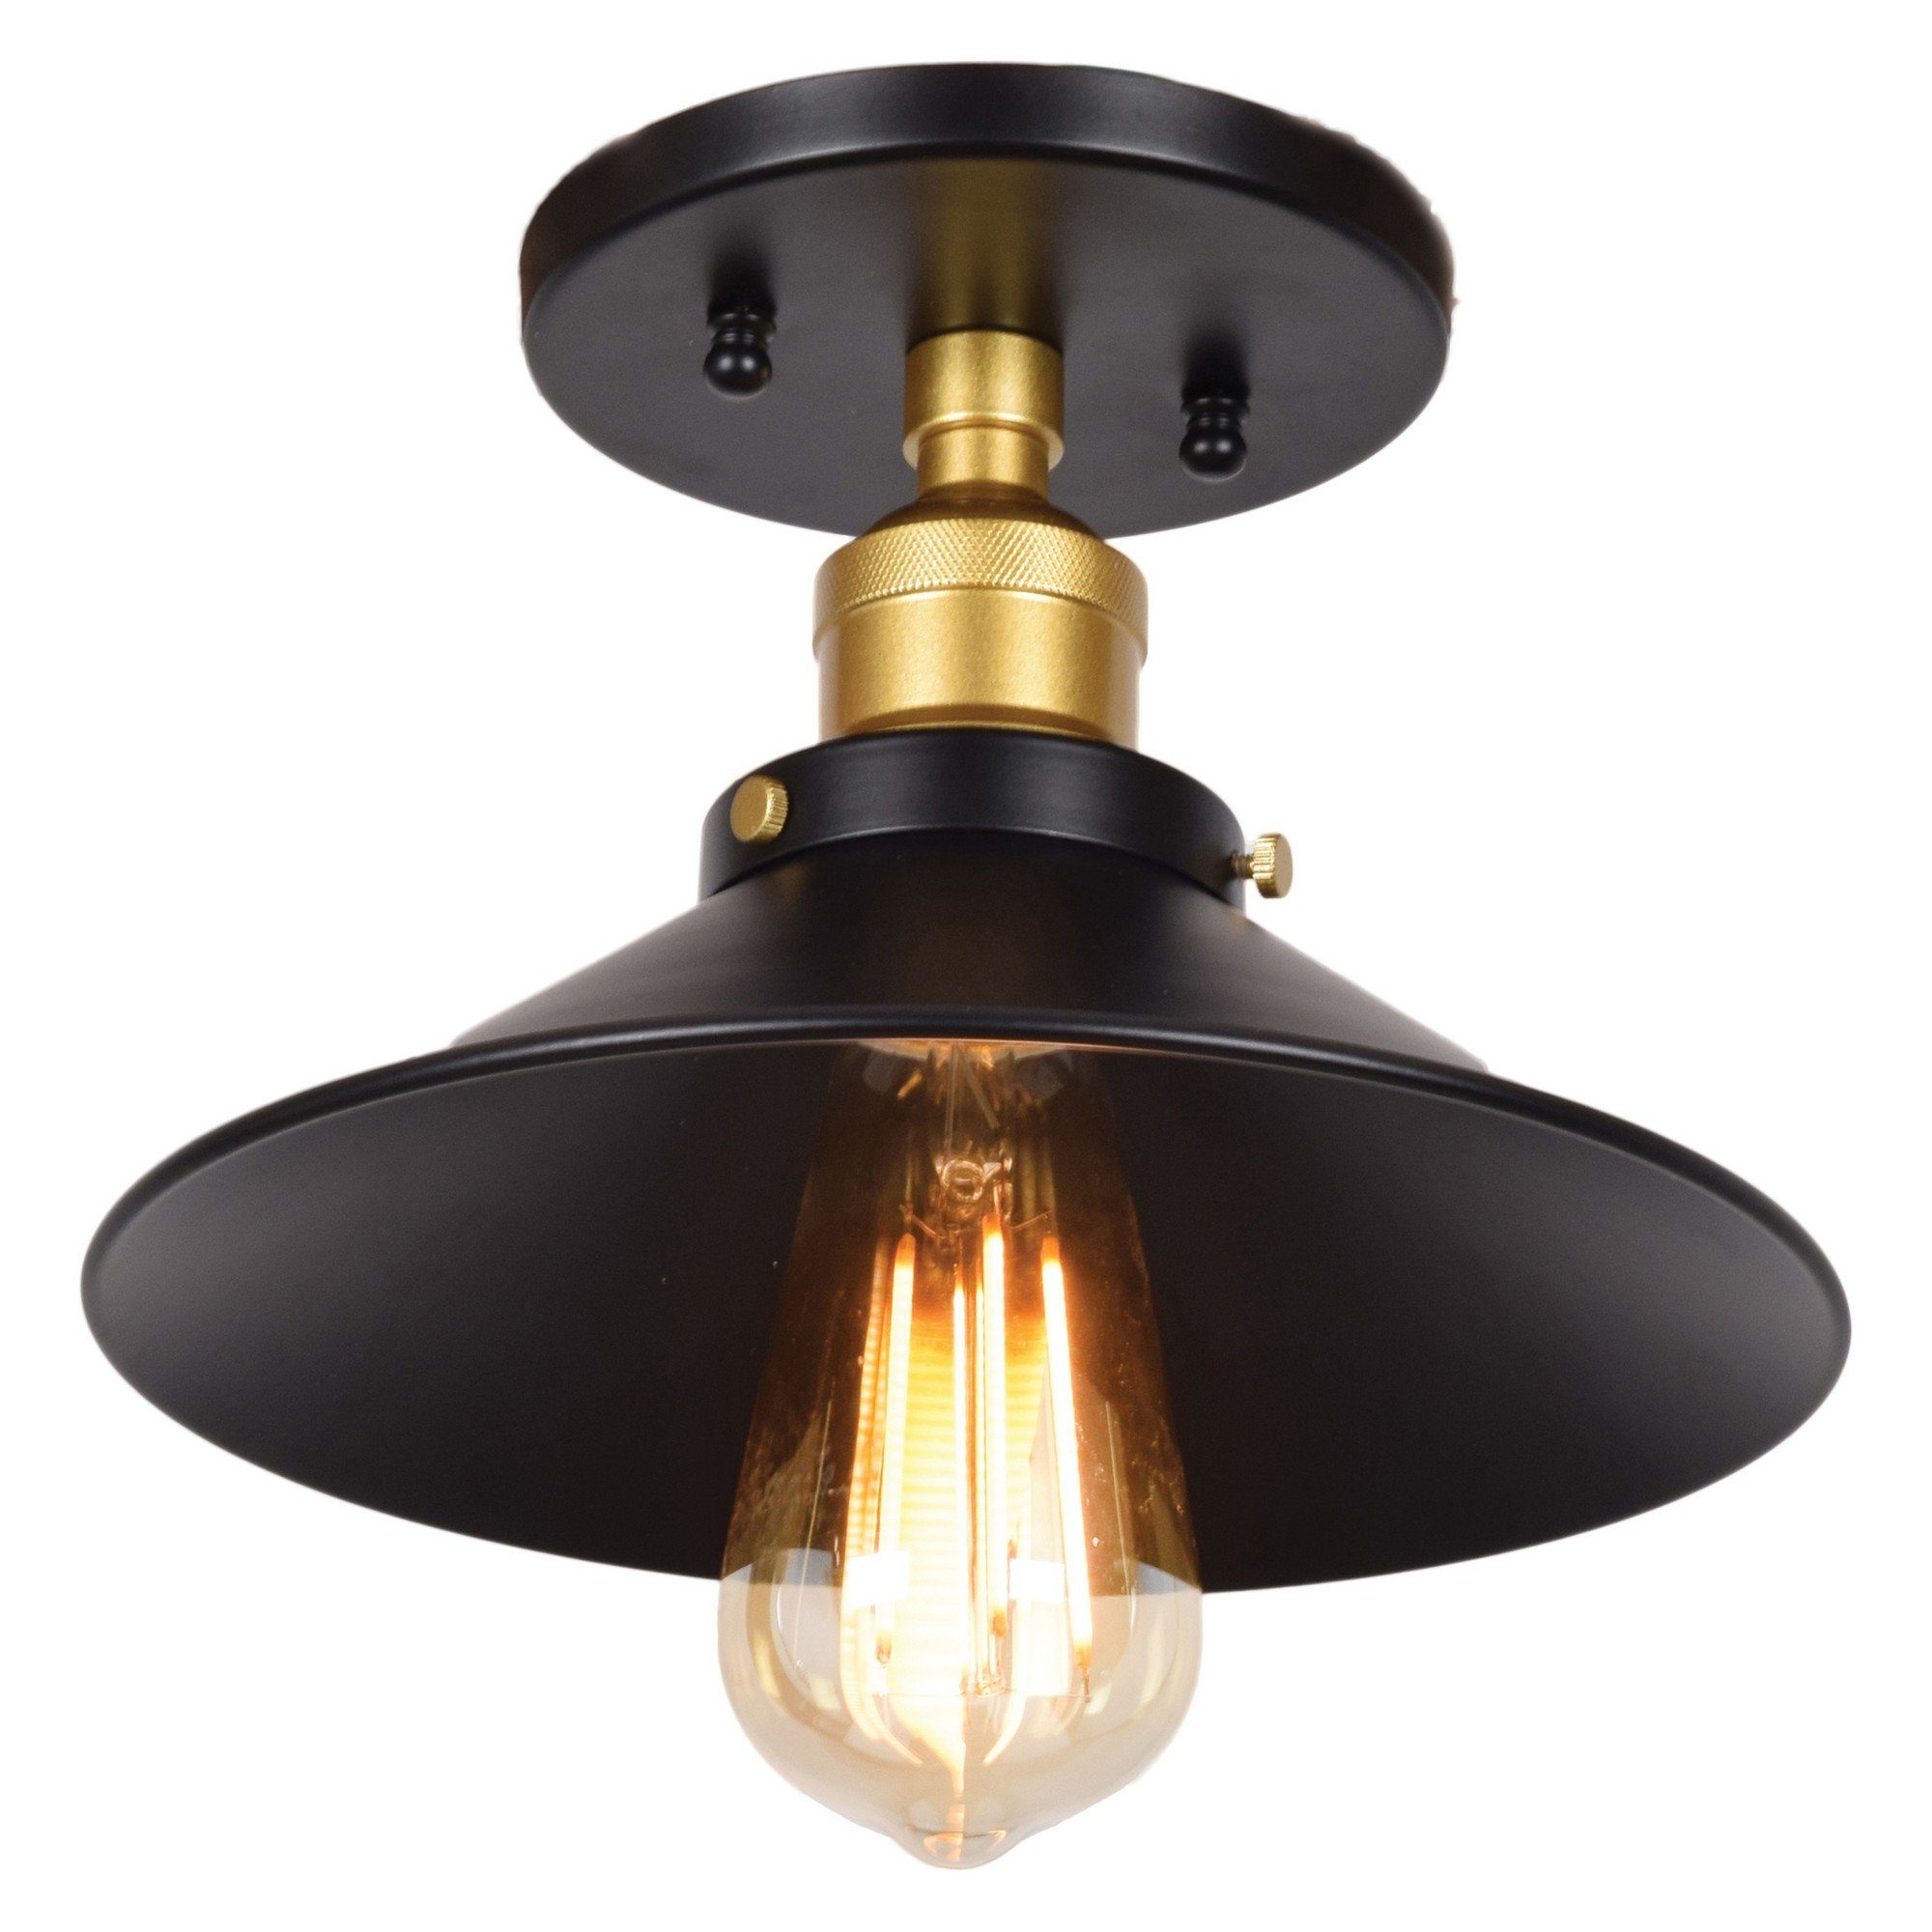 The District 1-Light Retro Semi-Flush with Metal Shade Ceiling Access Lighting 